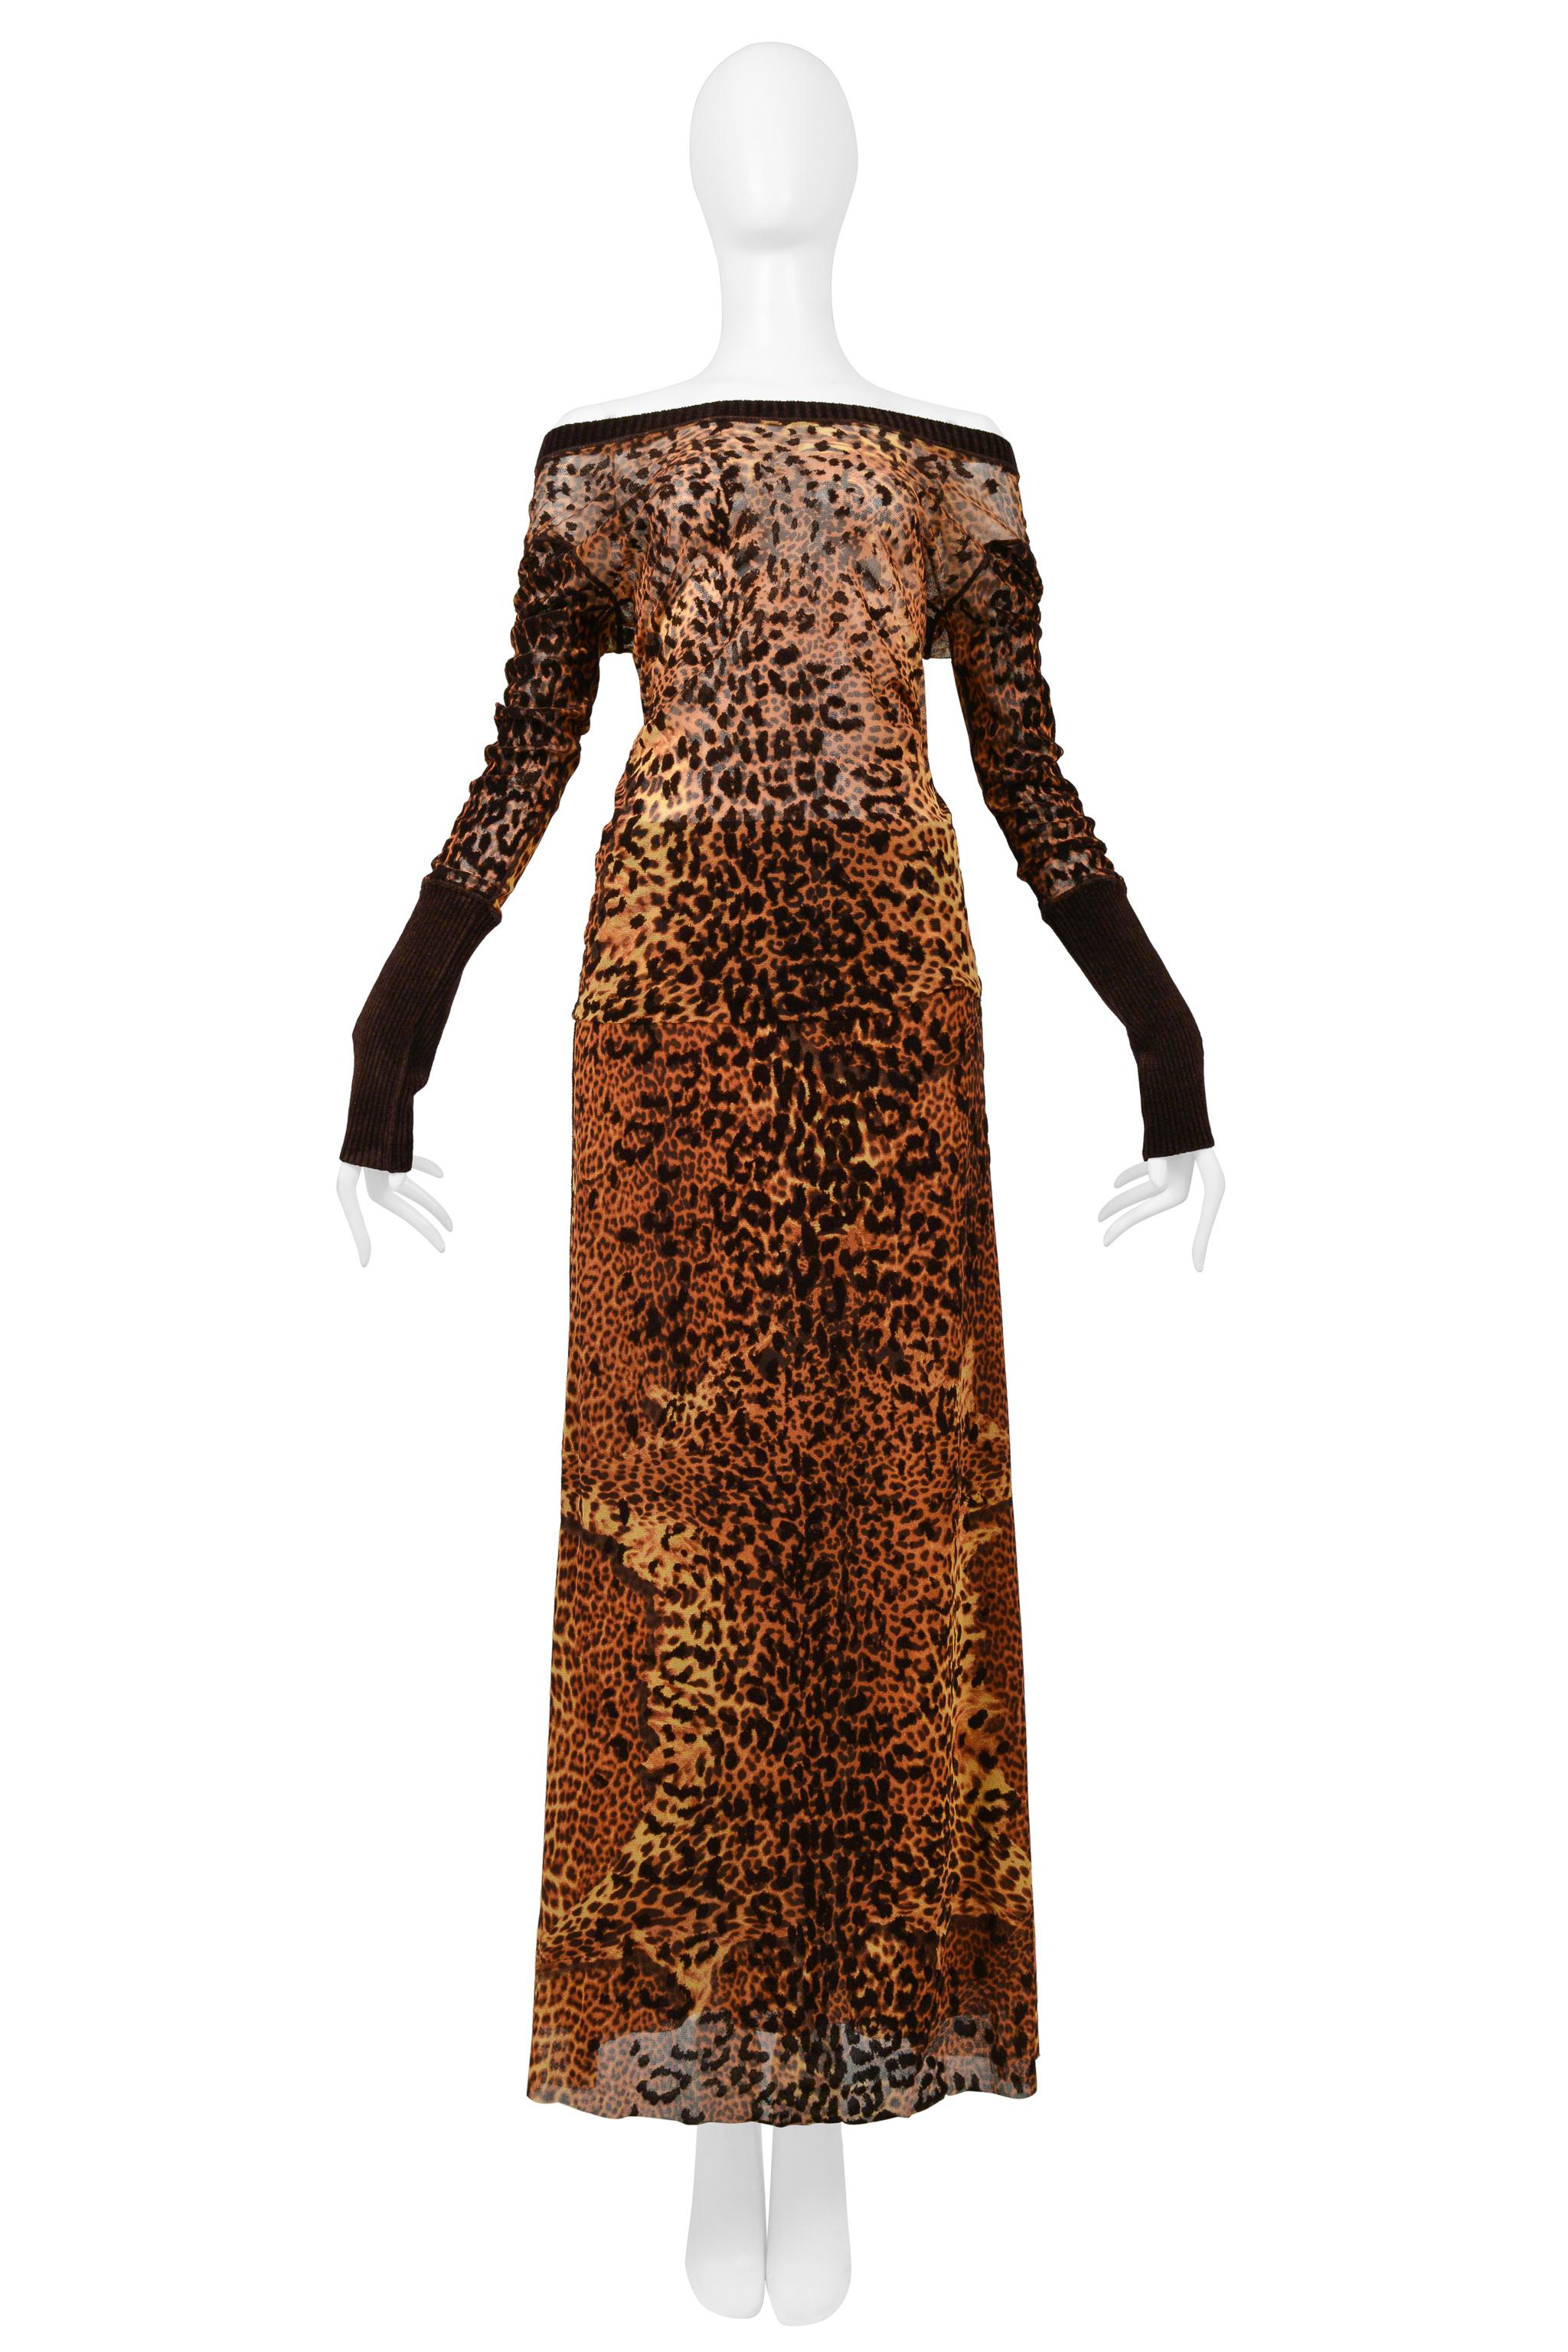 Resurrection is delighted to offer a skirt and top ensemble featuring a transparent mesh leopard print fabric with velvet textured detailing. Top features a stretchy fitted shape, dramatic sleeve length with ribbed velvet forearms, ribbed velvet